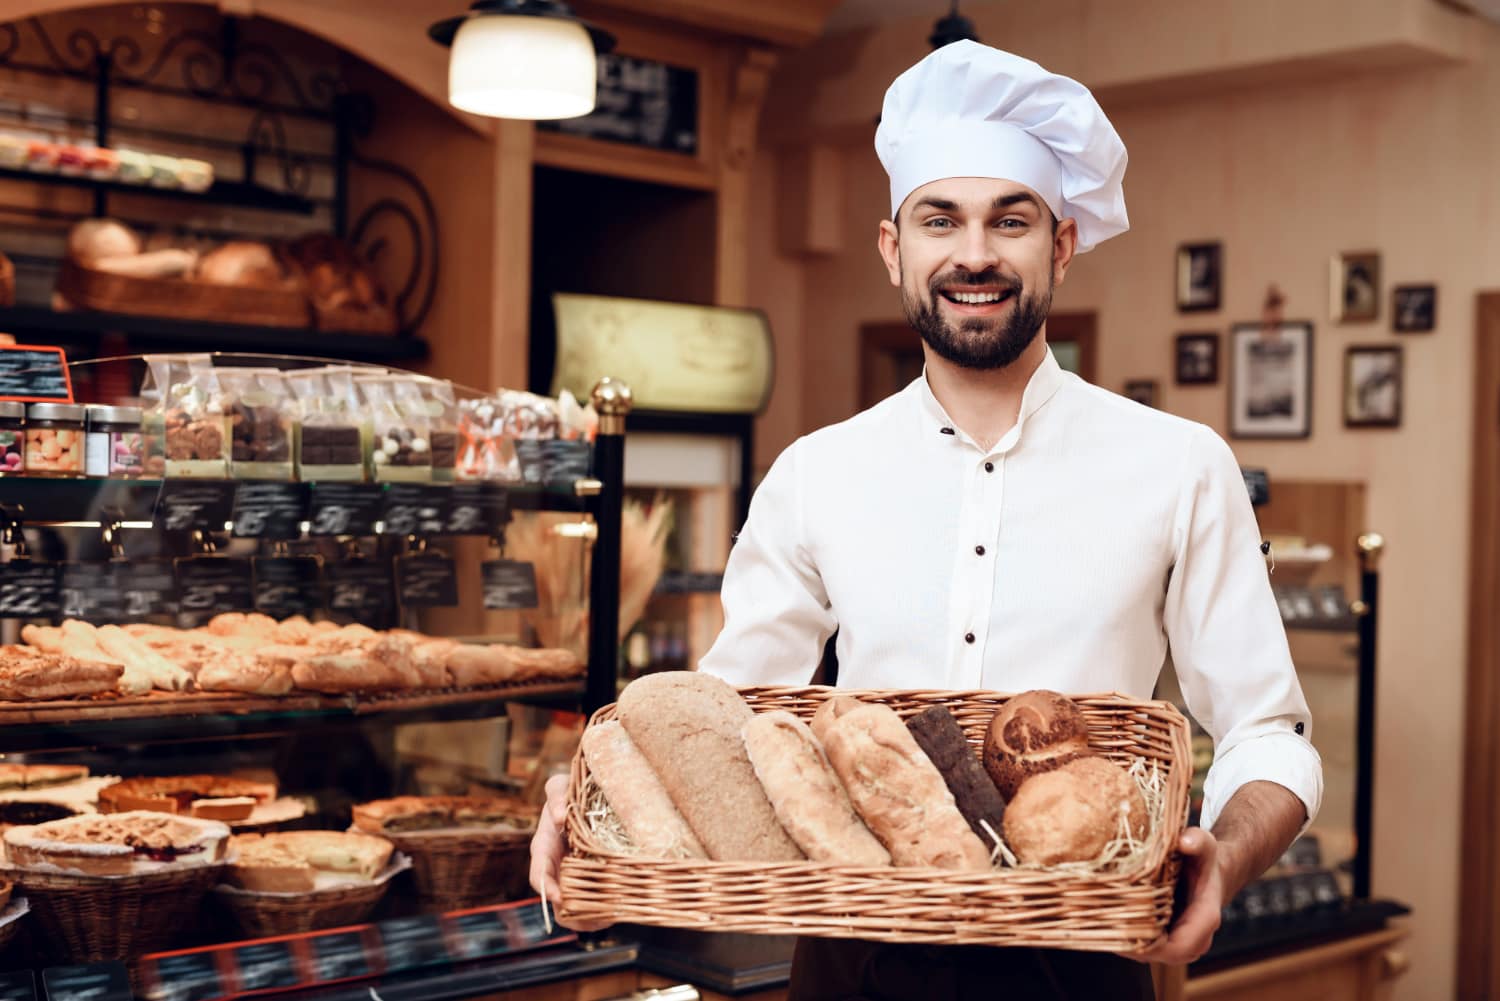 How do you maintain the reputation of your bakery?